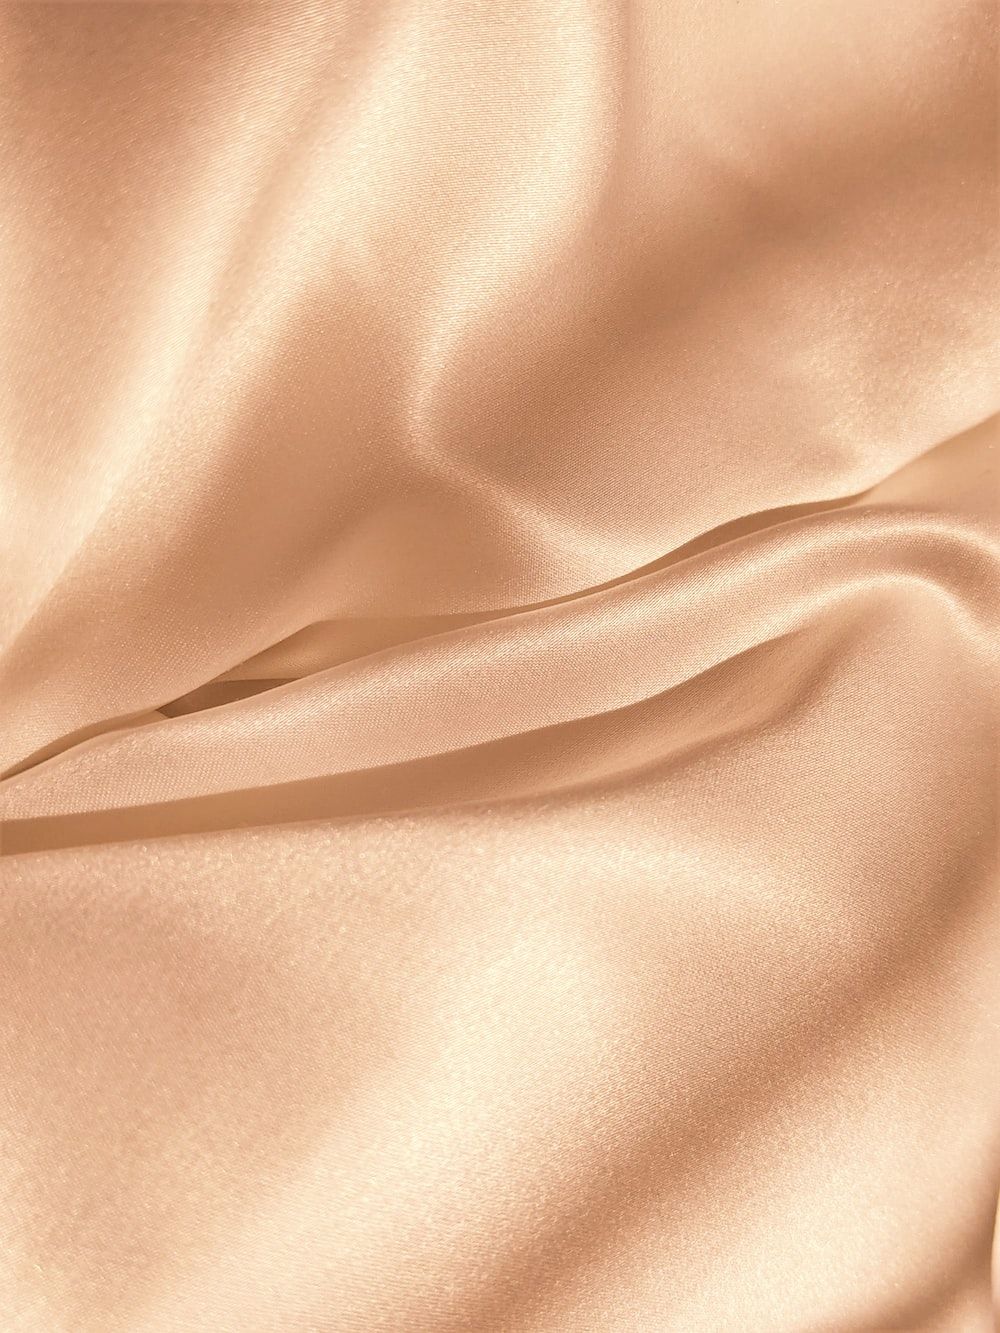 Silk Sheets Picture. Download Free Image